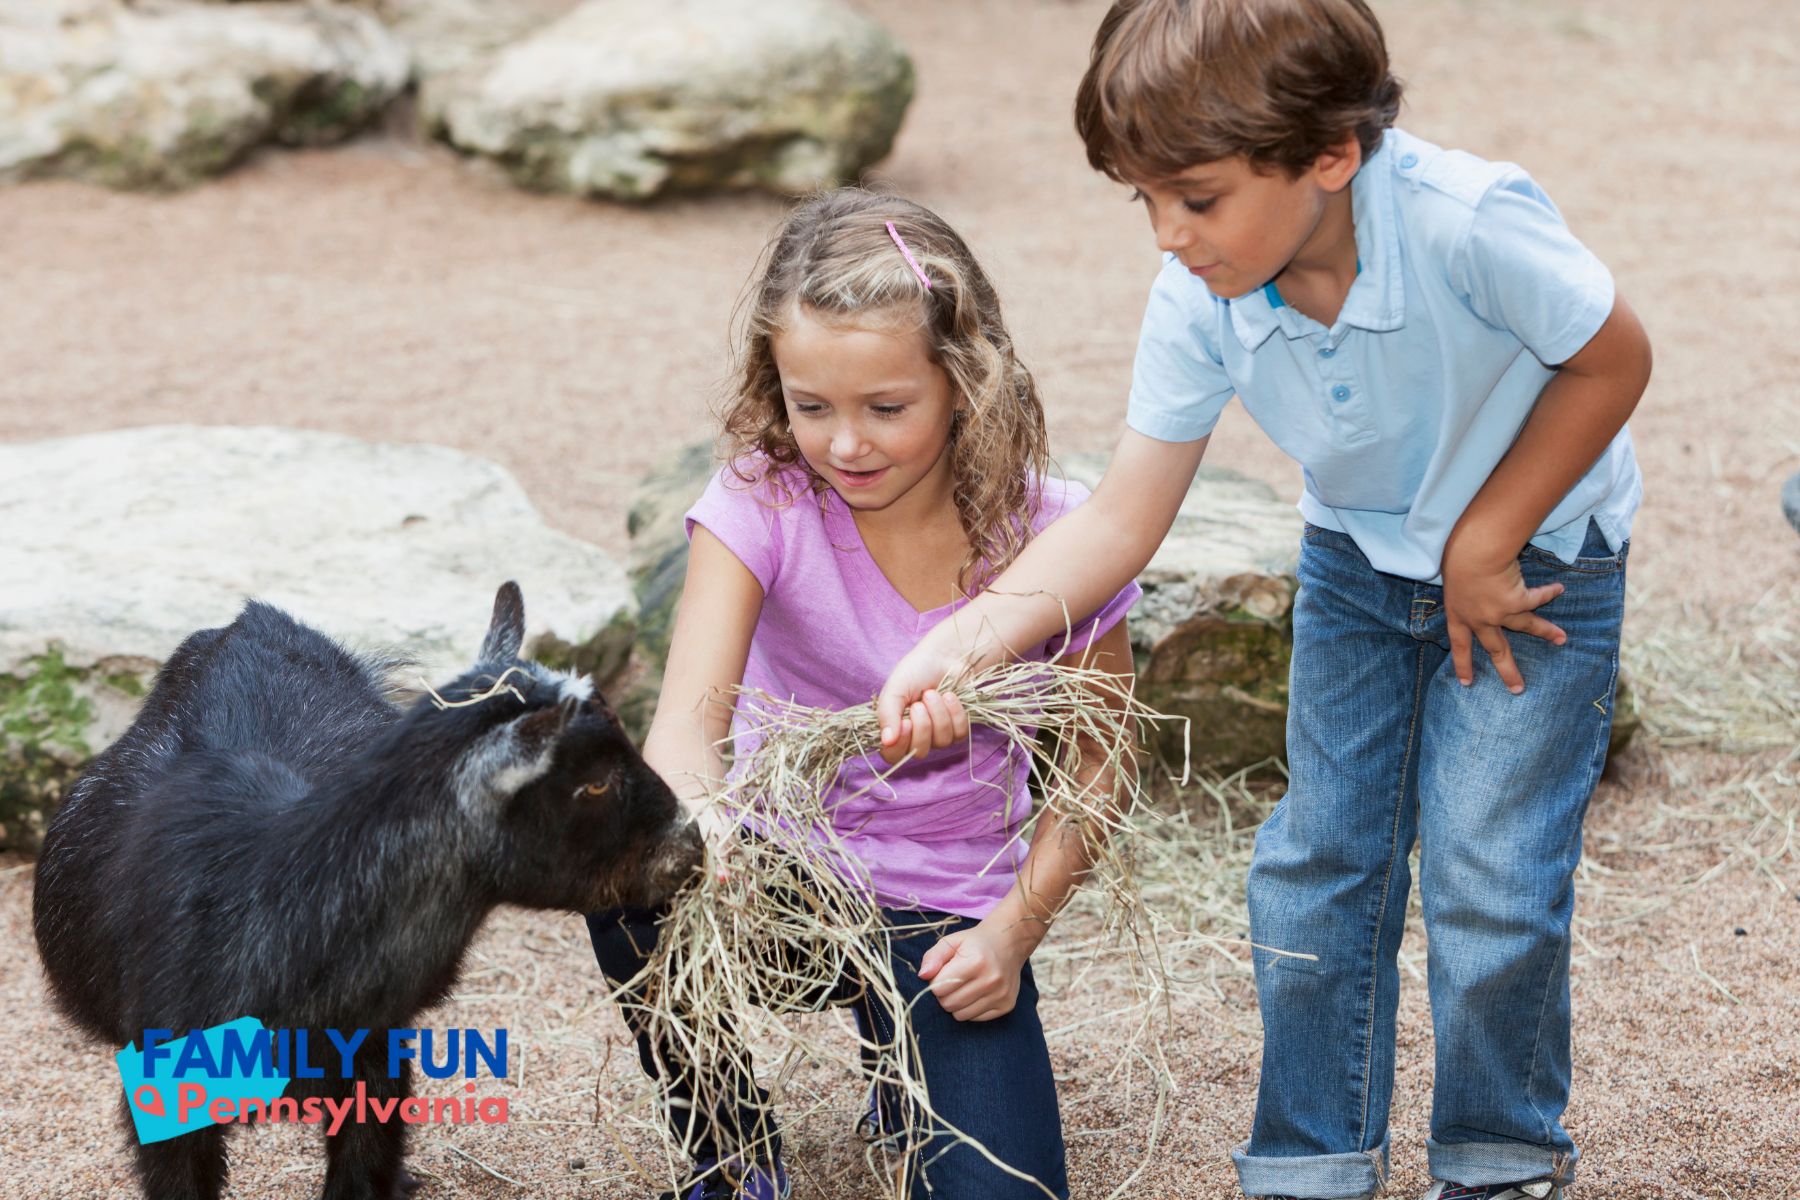 petting zoo best party activities for kids (4)